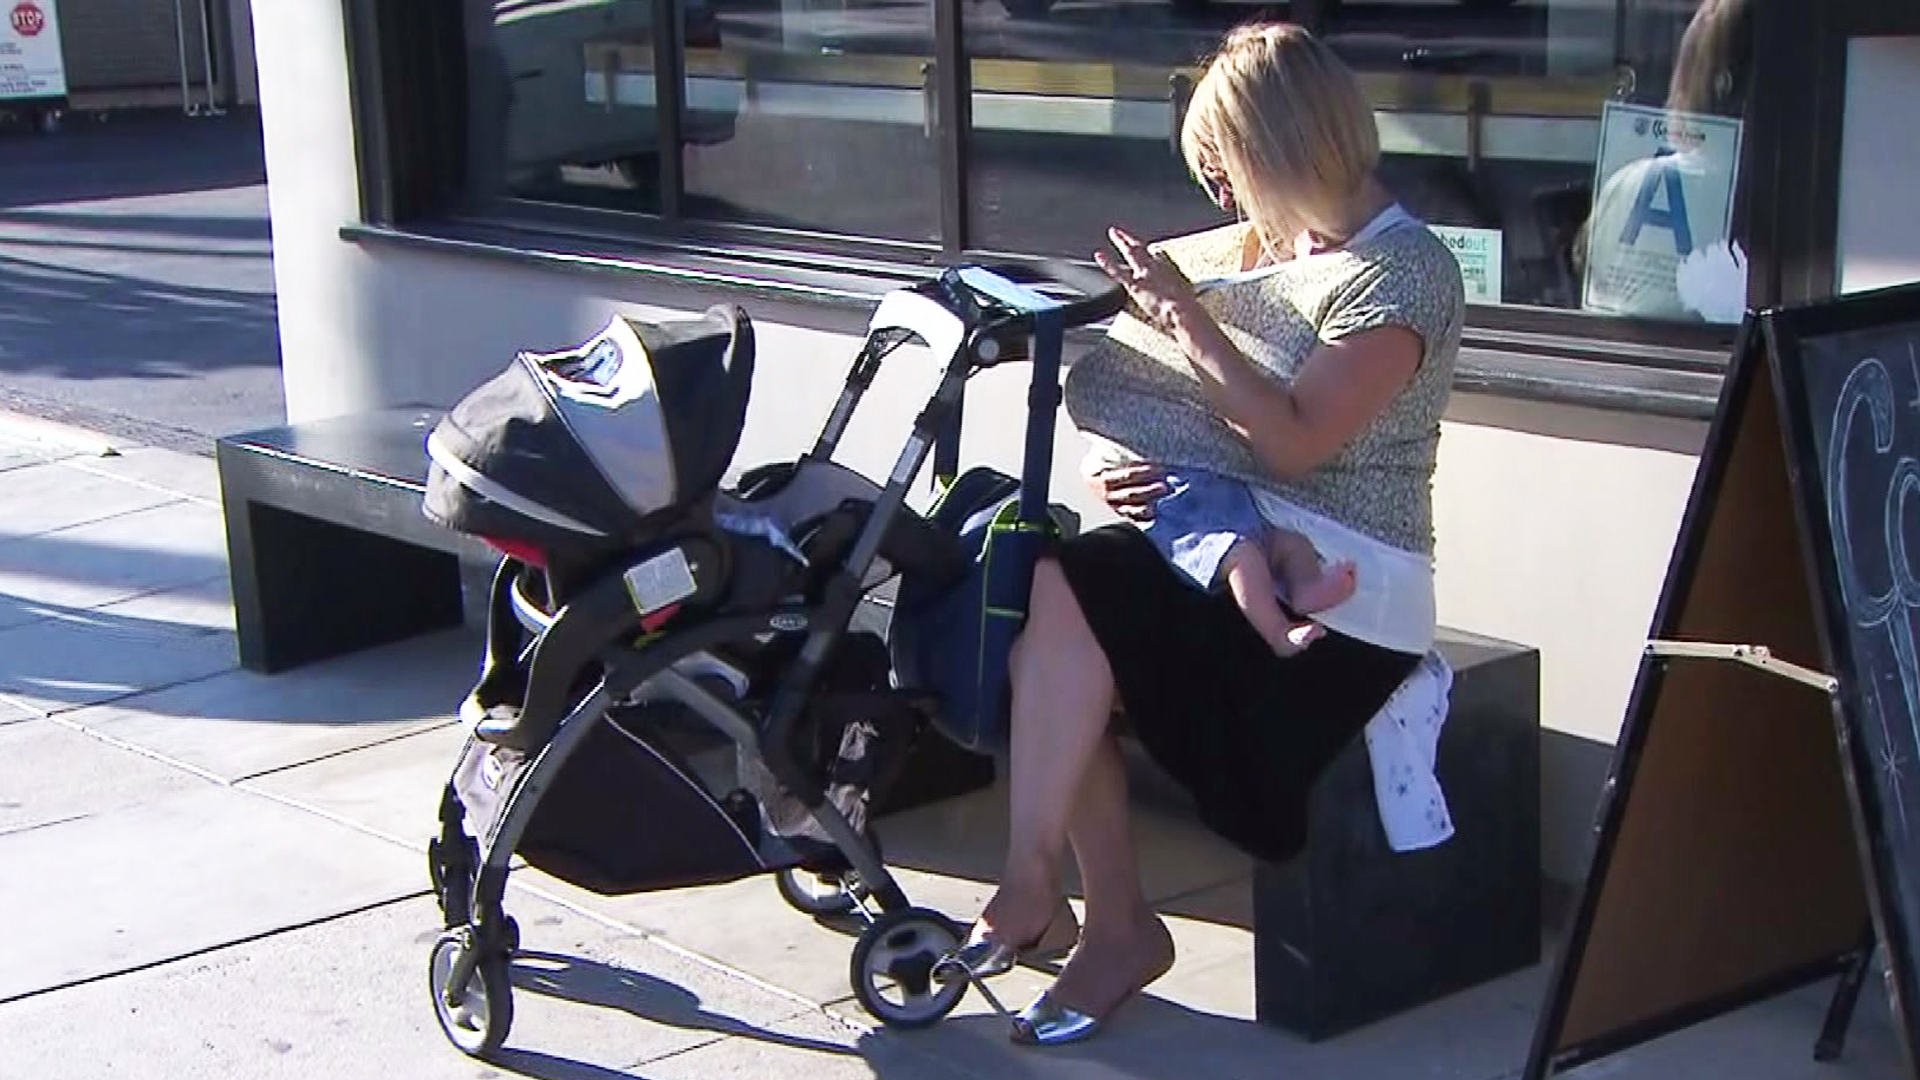 Ingrid Wiese-Hesson says she was nursing her baby in the back of the Beverly Hills Anthropologie store when she was escorted to the restroom. (Credit: KTLA)